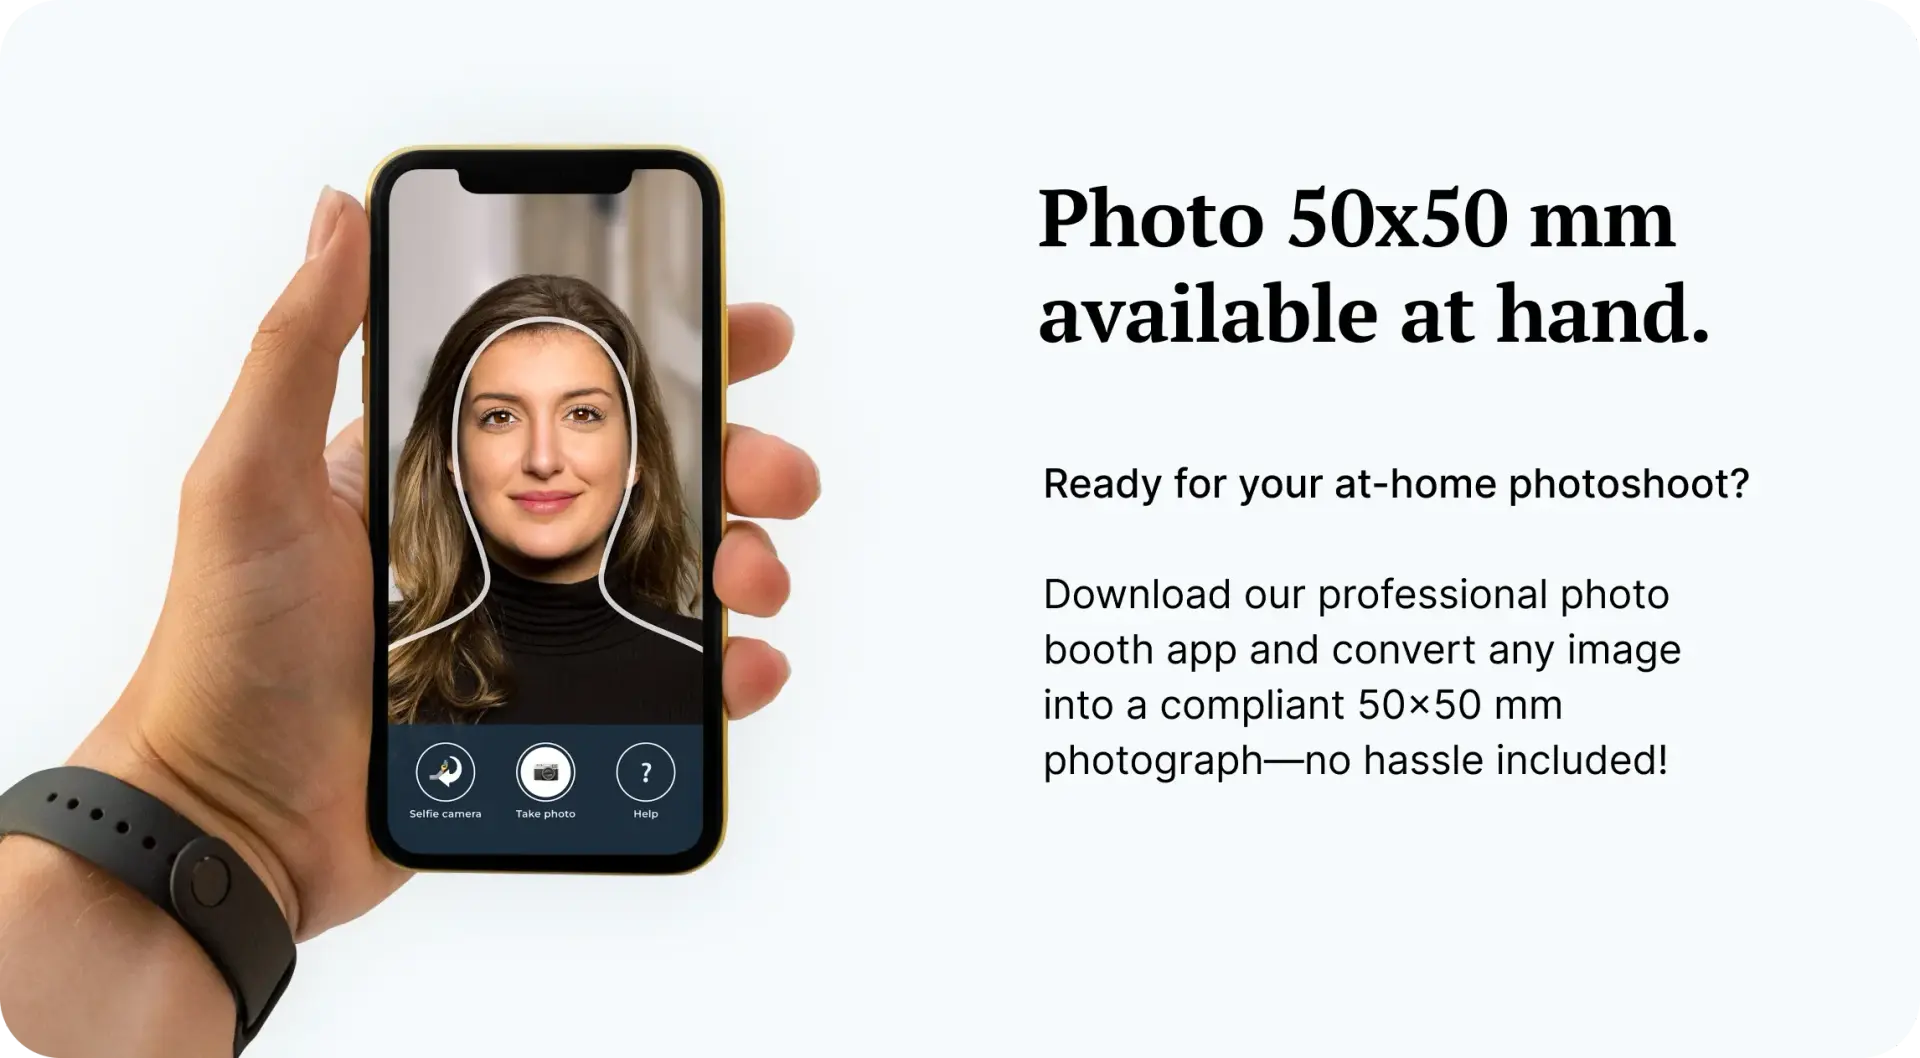 An image explaining how to take professional 5x5 cm photos with your smartphone at home.